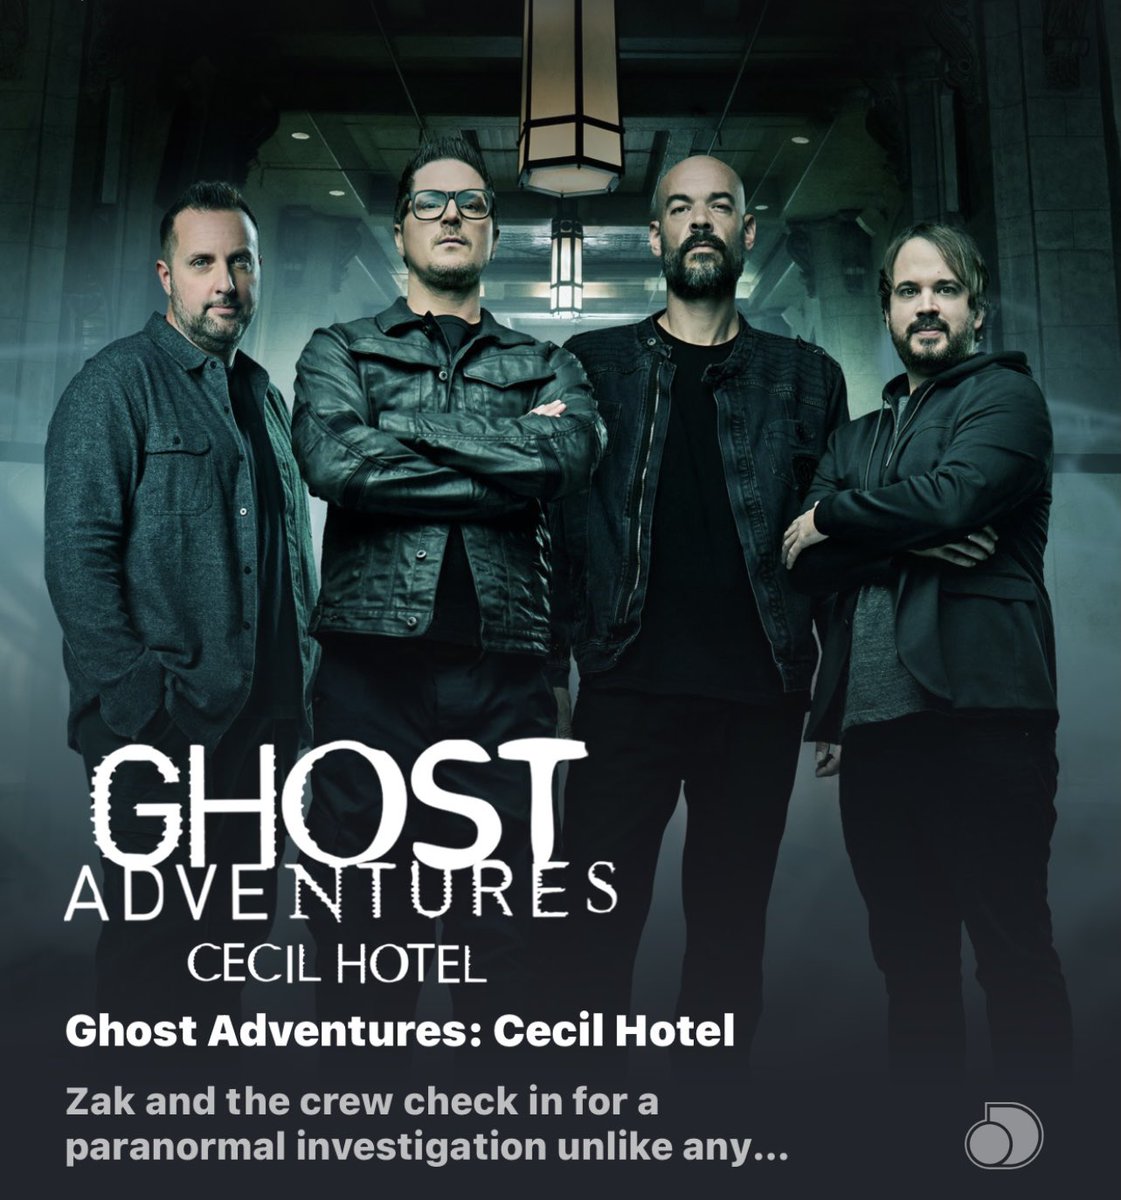 ghost adventures cecil hotel